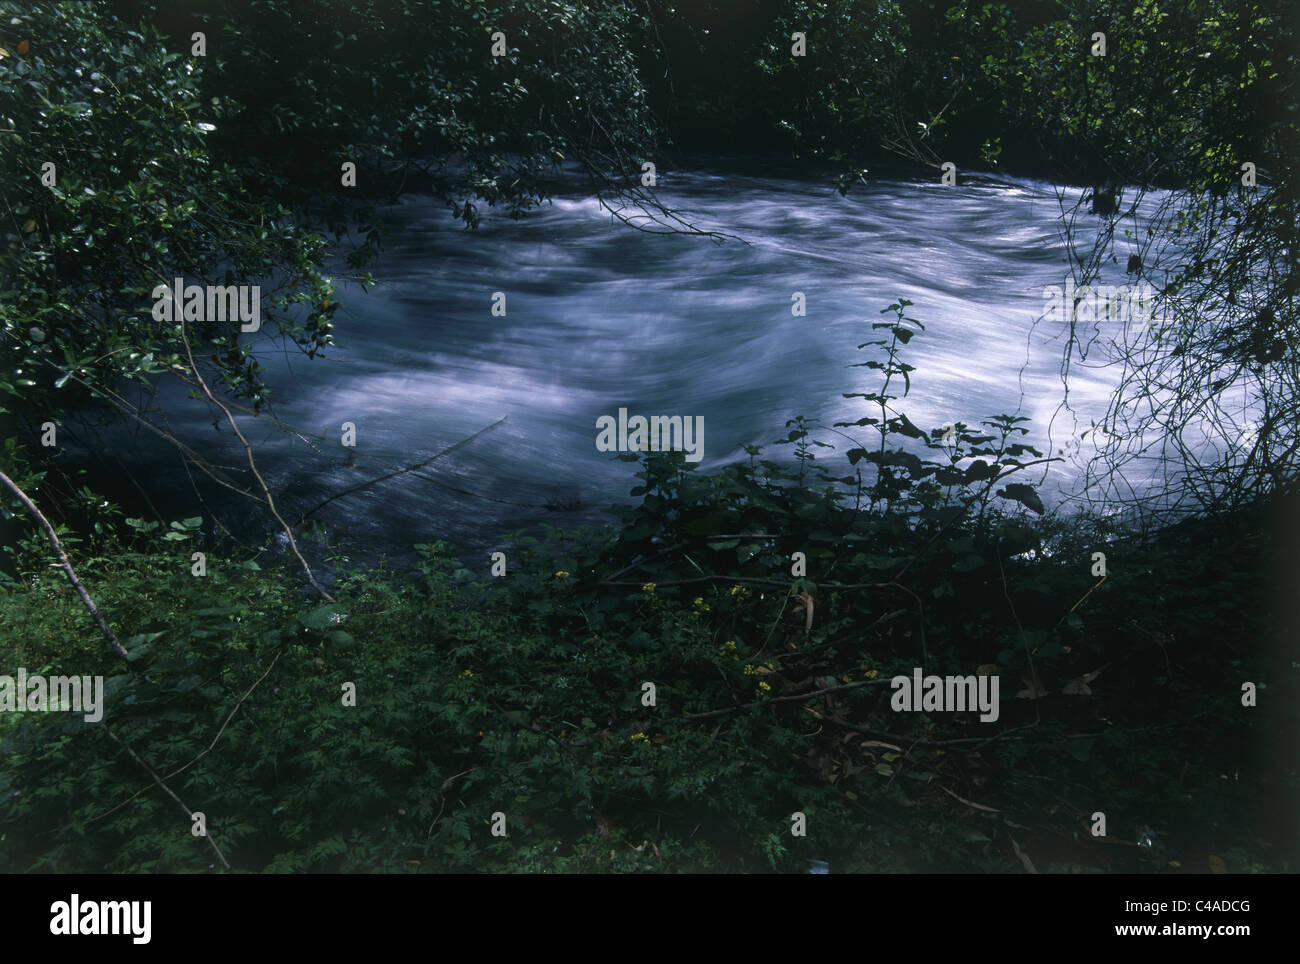 Photograph of the Dan stream in the Upper Galilee Stock Photo